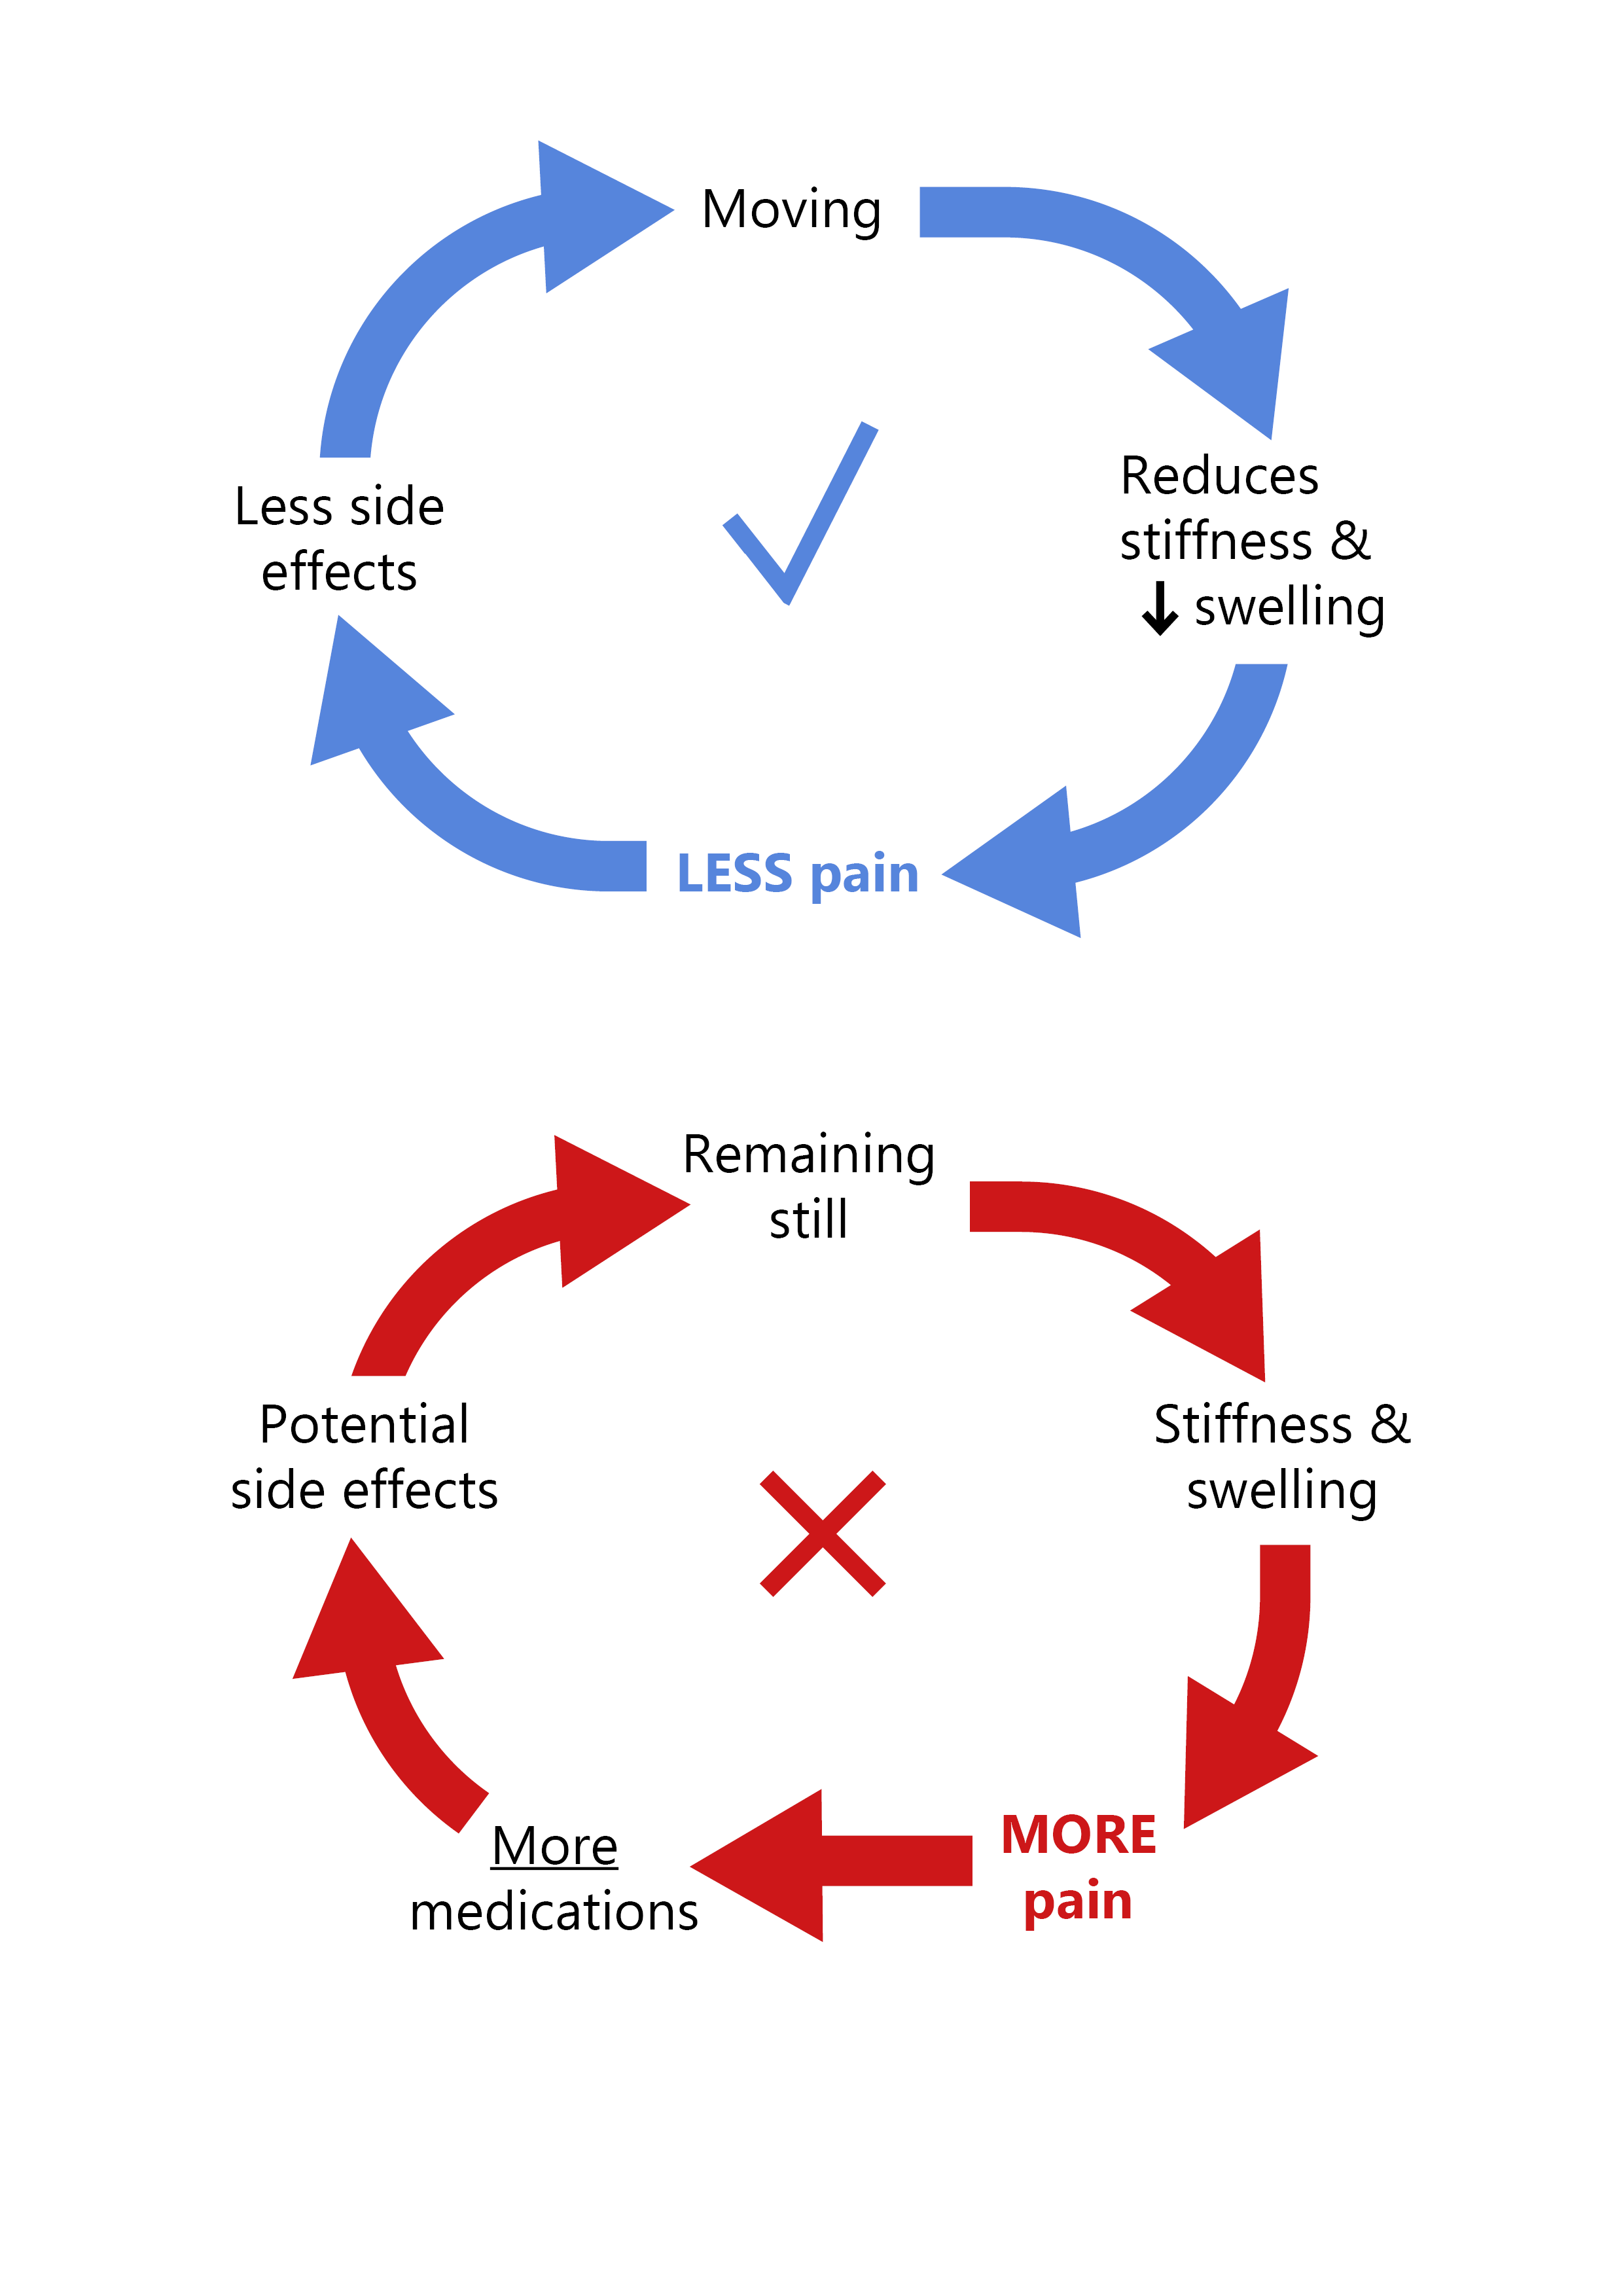 Diagram showing how moving around reduces stiffness and swelling, leading to less pain and side effects. Whereas remaining still increases stiffness, swelling, and pain, which leads to patients having to take more pain relief.